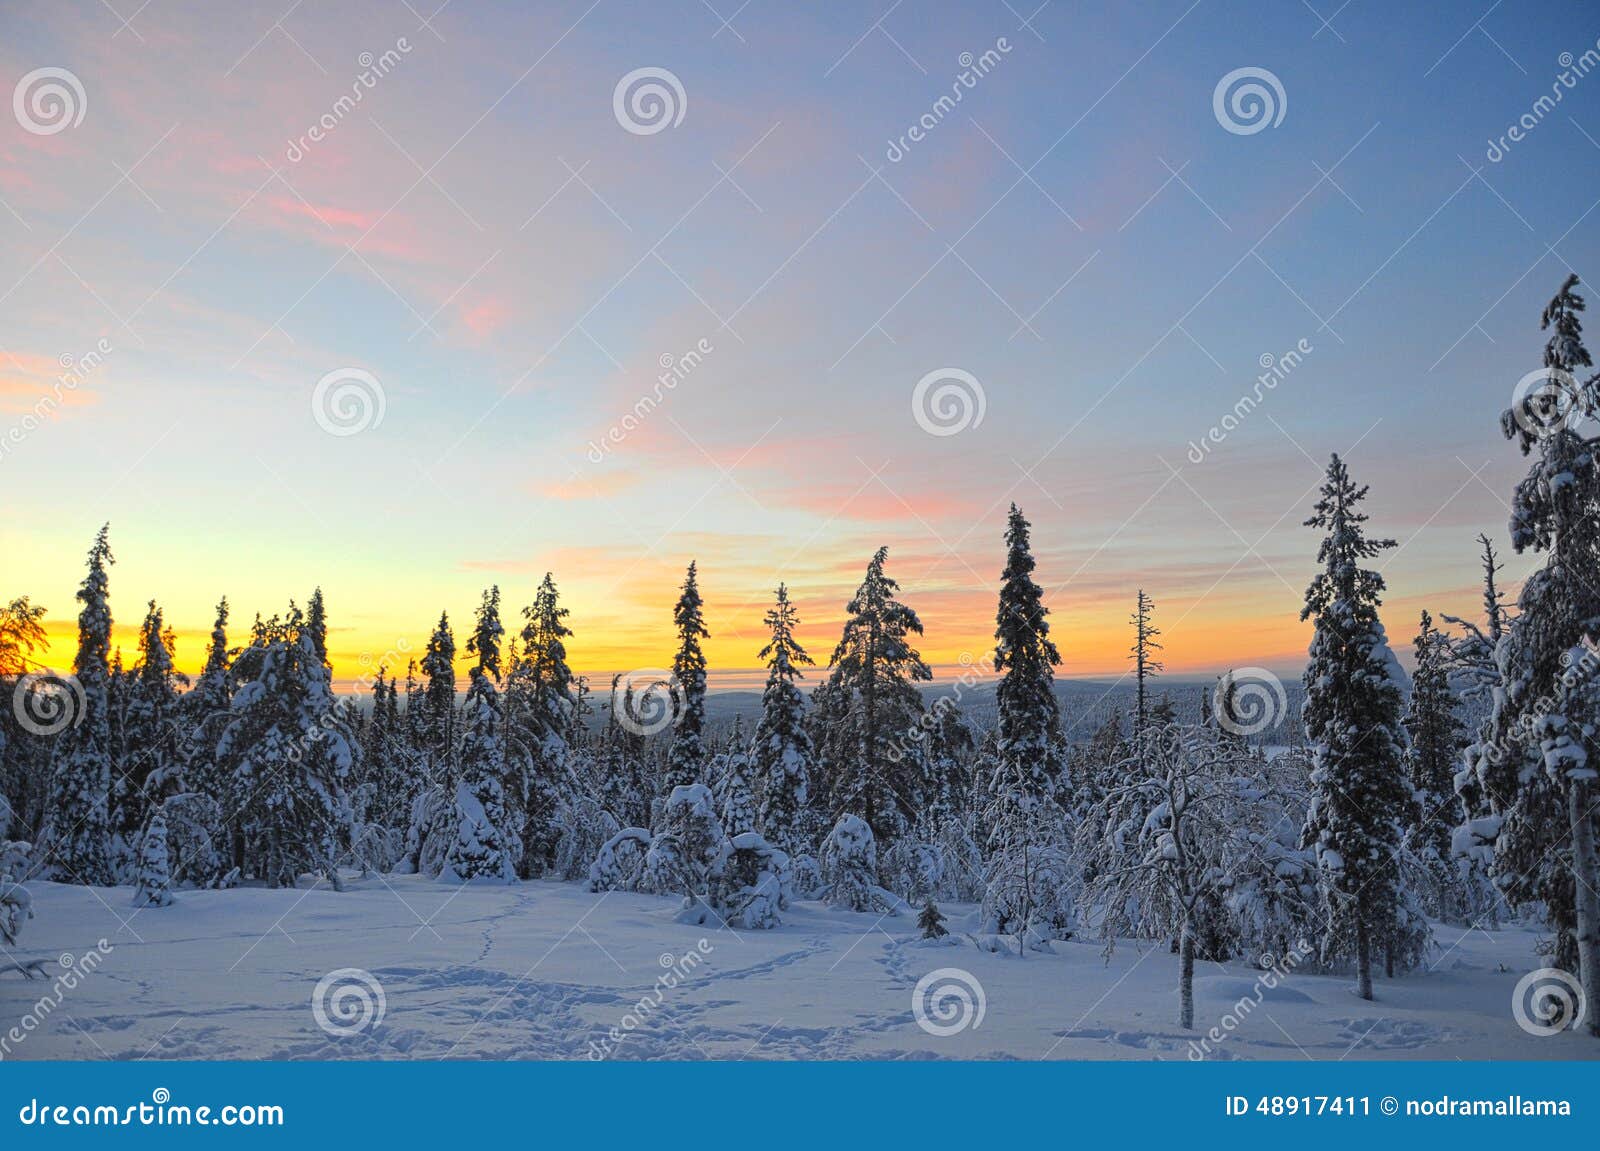 sunrise over a forest in lapland, finland